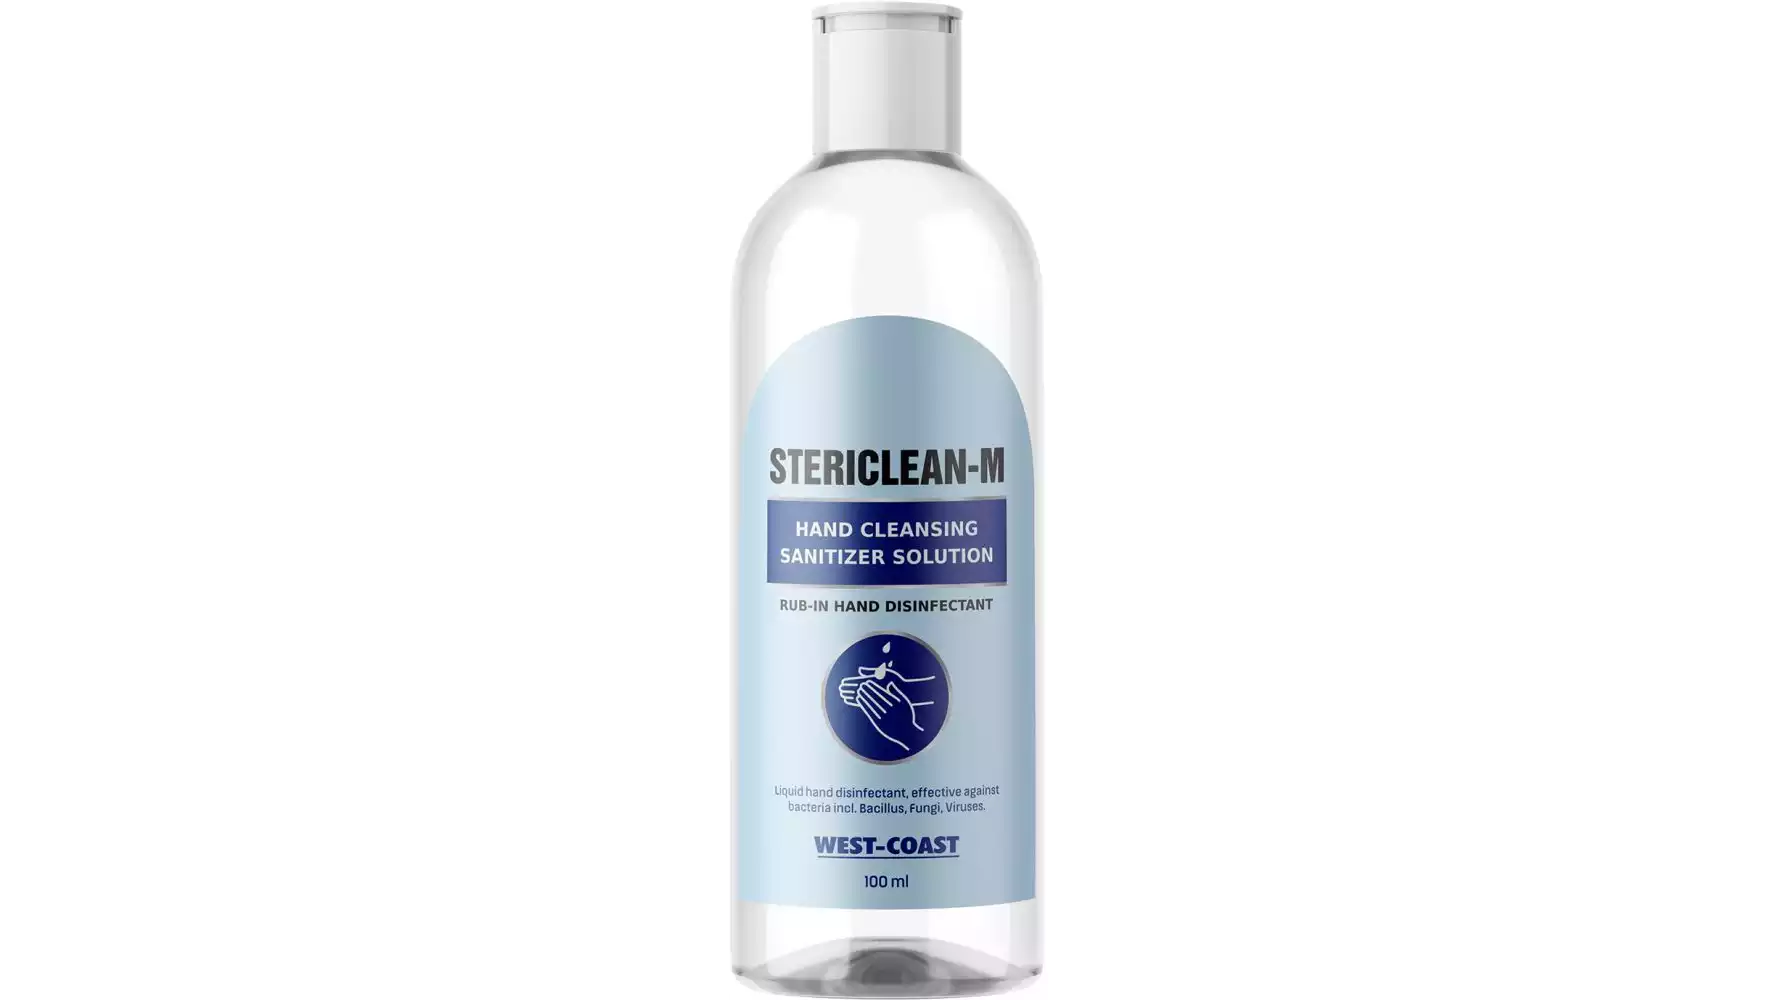 Healthvit Stericlean-M Hand Cleansing Sanitizer Solution (100ml)